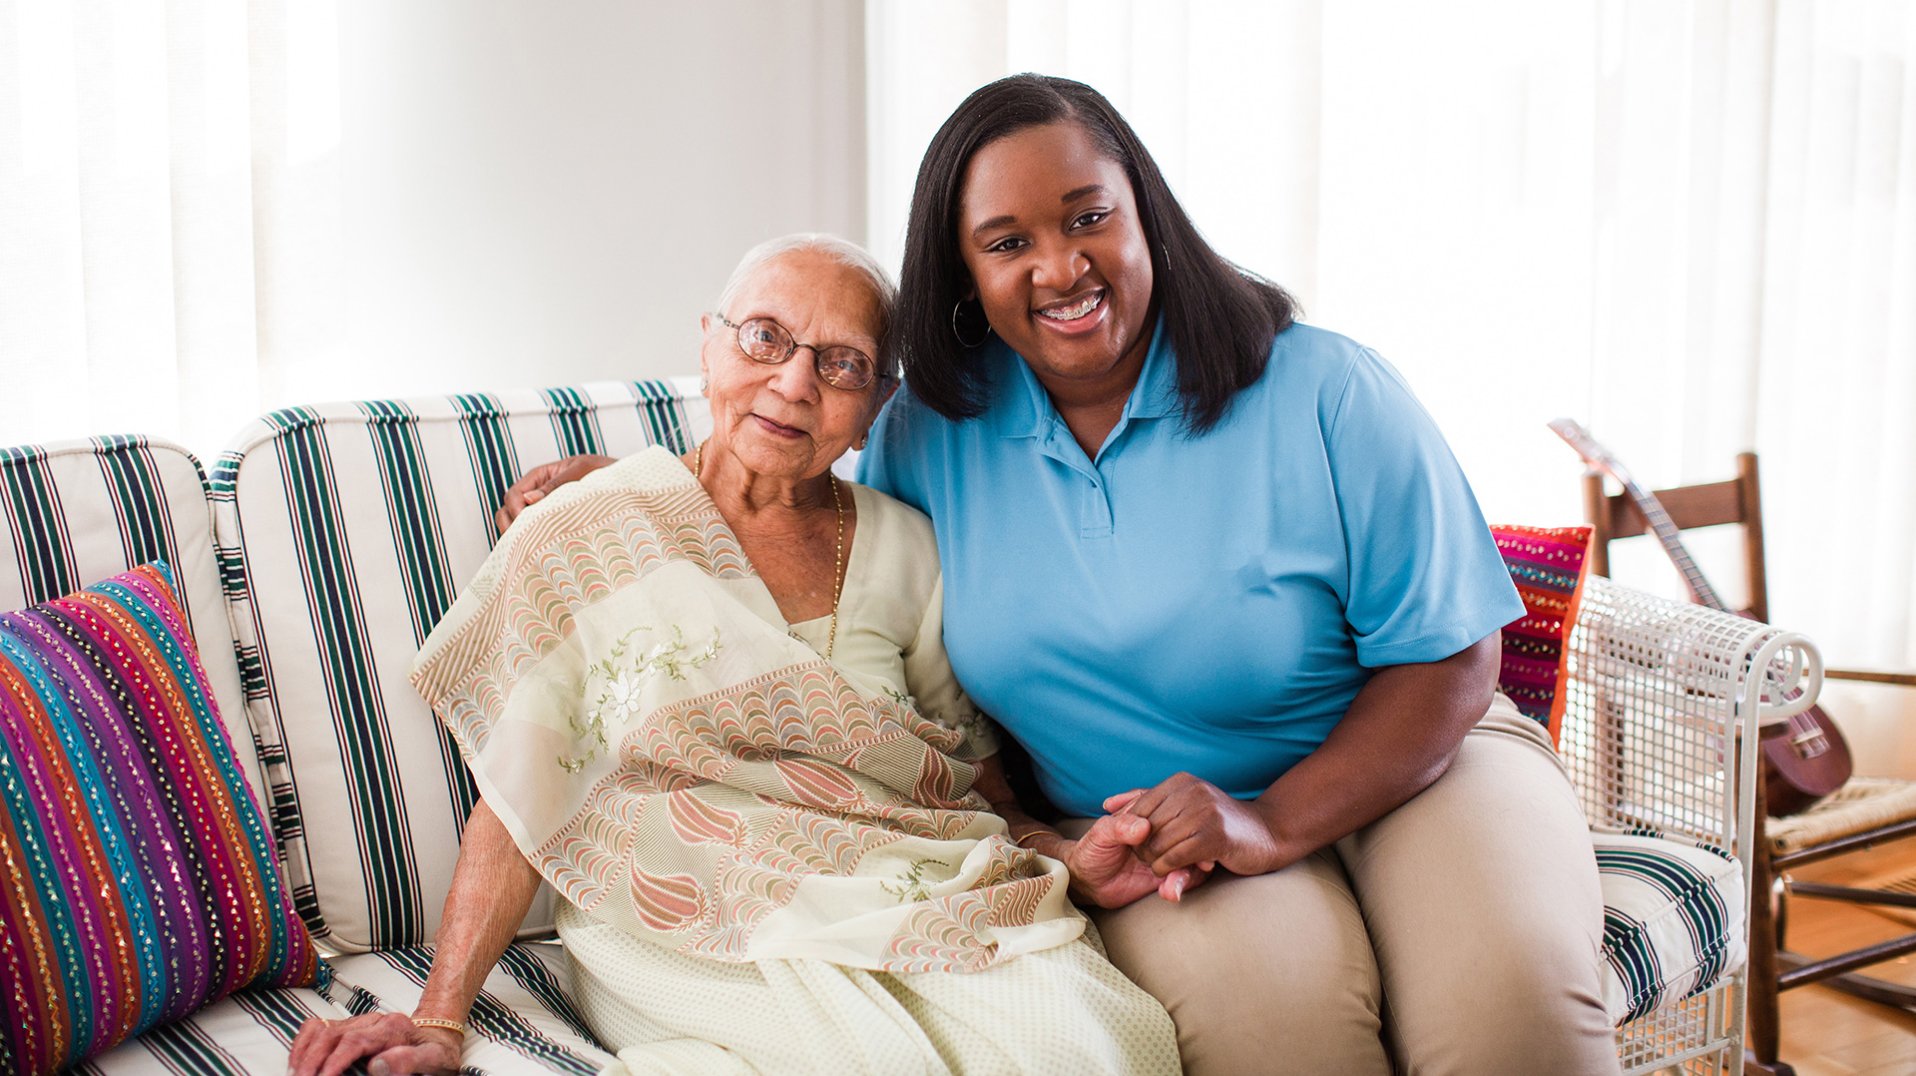 A caregiver smiling and holding hands with an elderly woman.